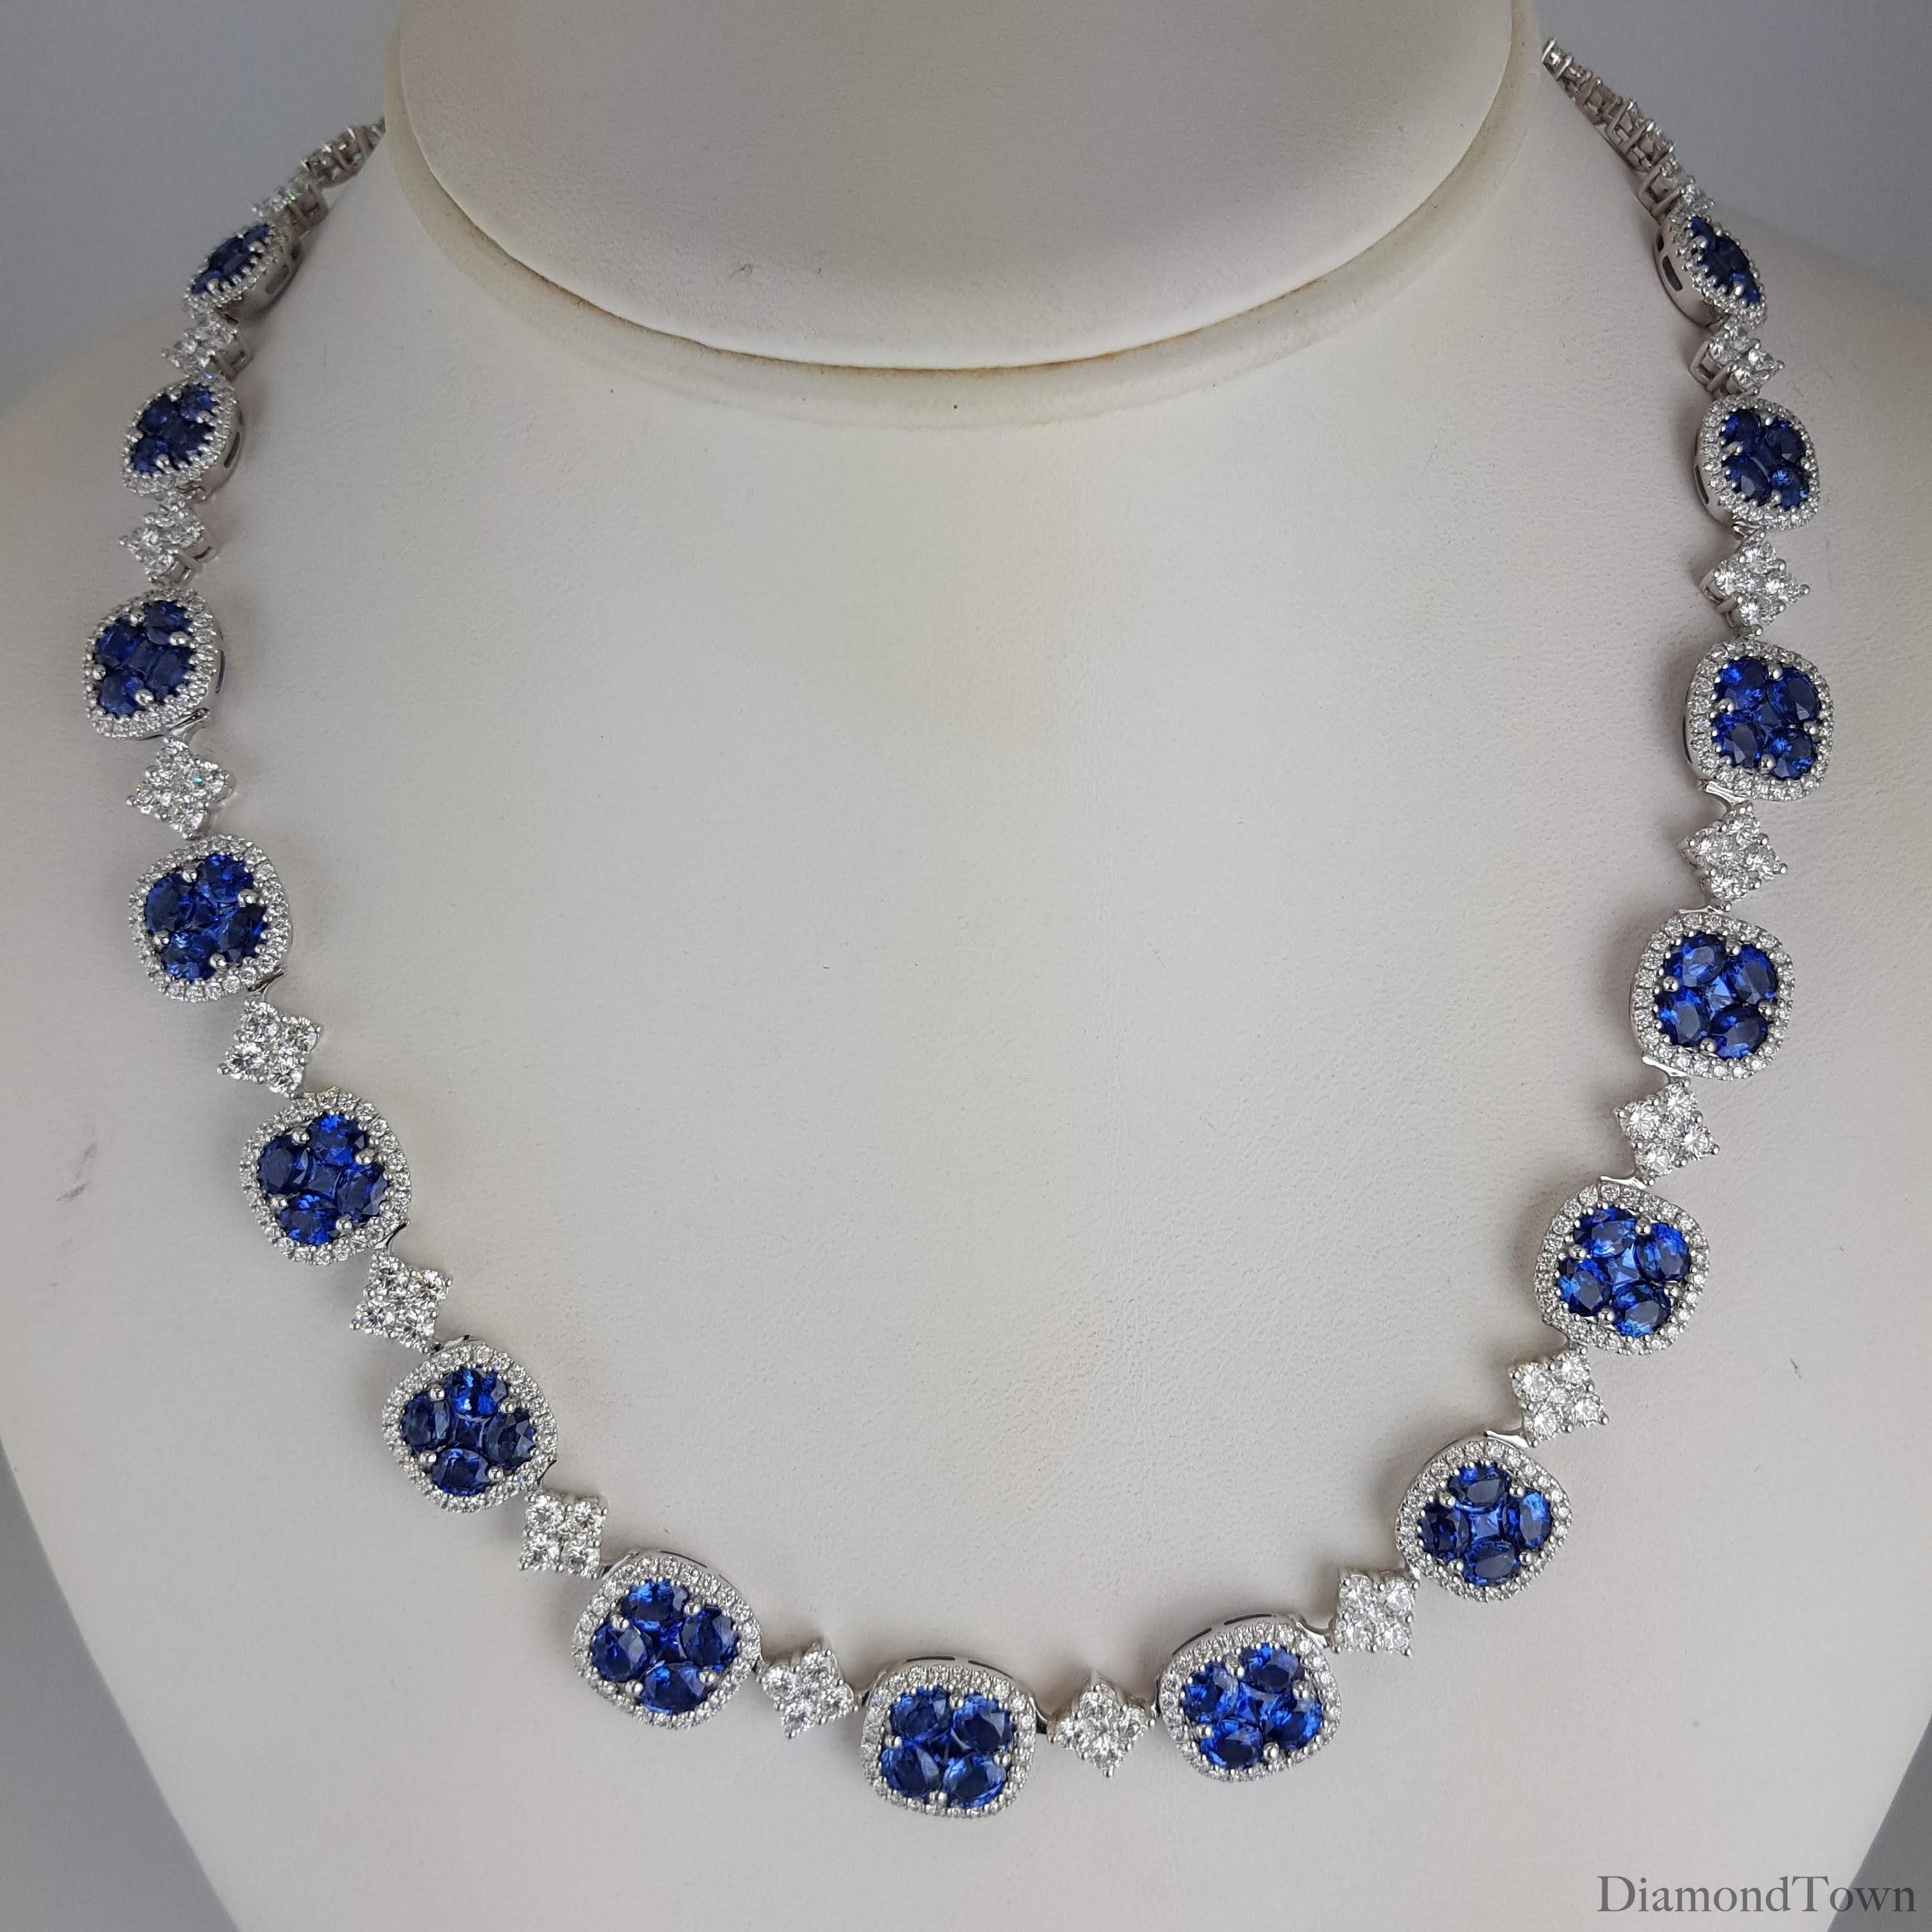 (DiamondTown) This impressive necklace features fifteen blue sapphire clusters, each inside a halo of round diamonds, and alternating with square clusters of round white diamonds. Additional diamond clusters extend to the back of the necklace.

Each